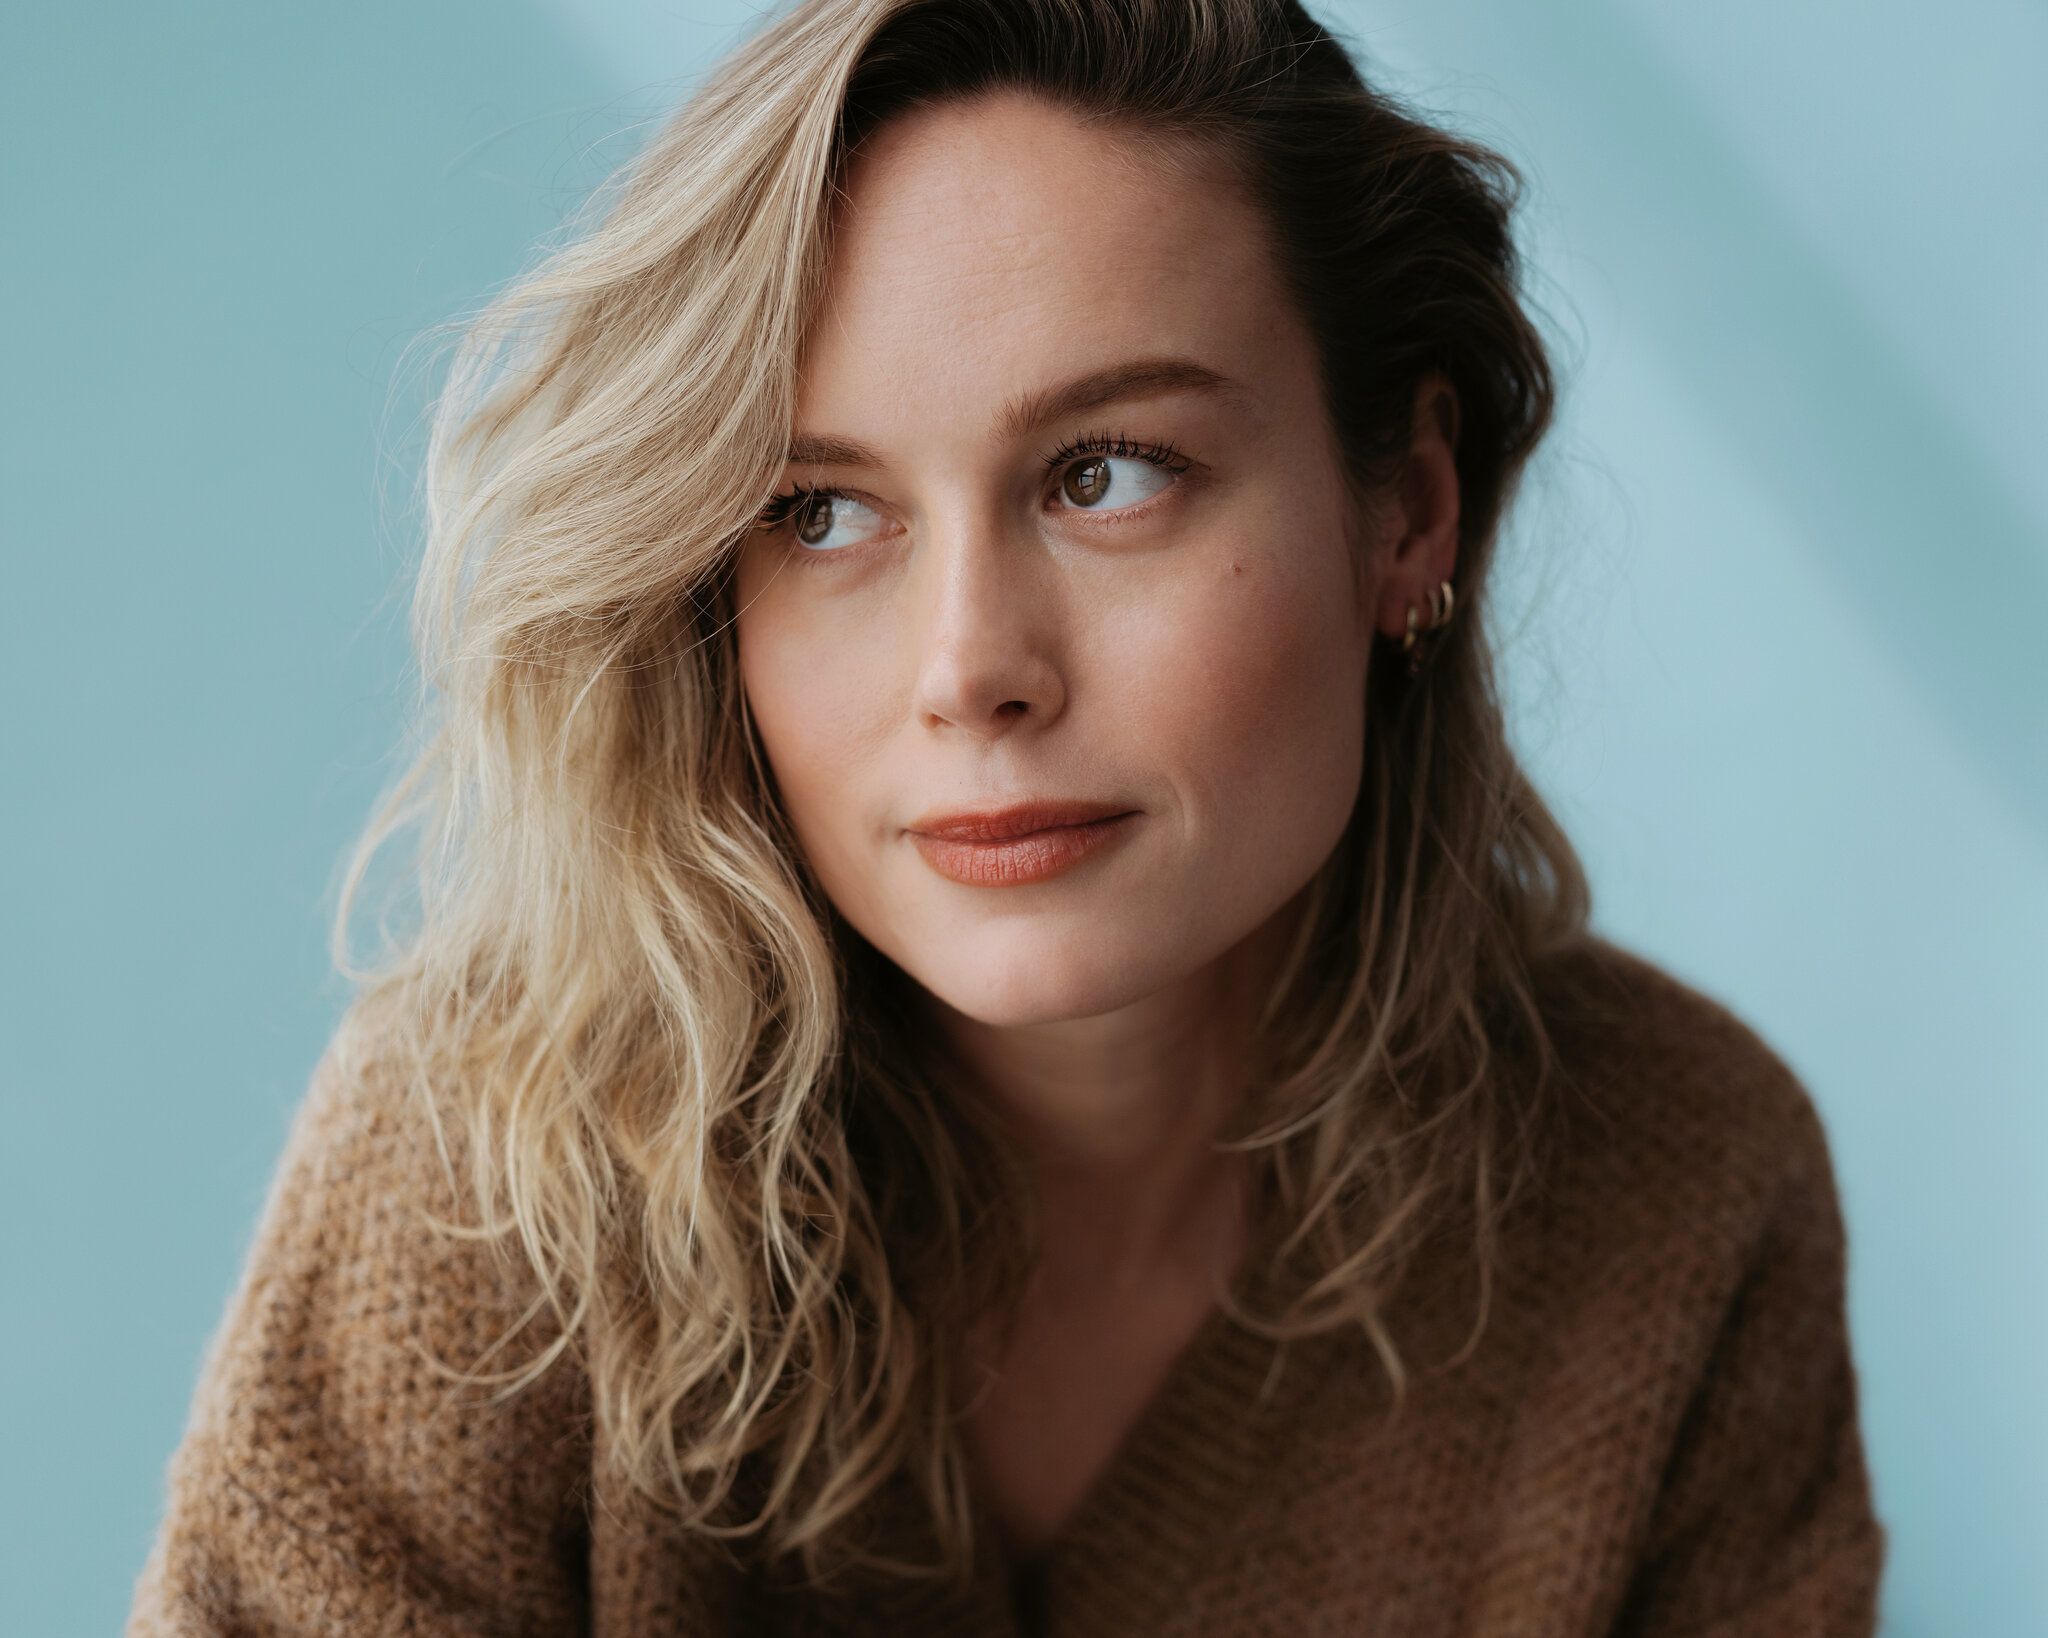 Brie for The New York Times